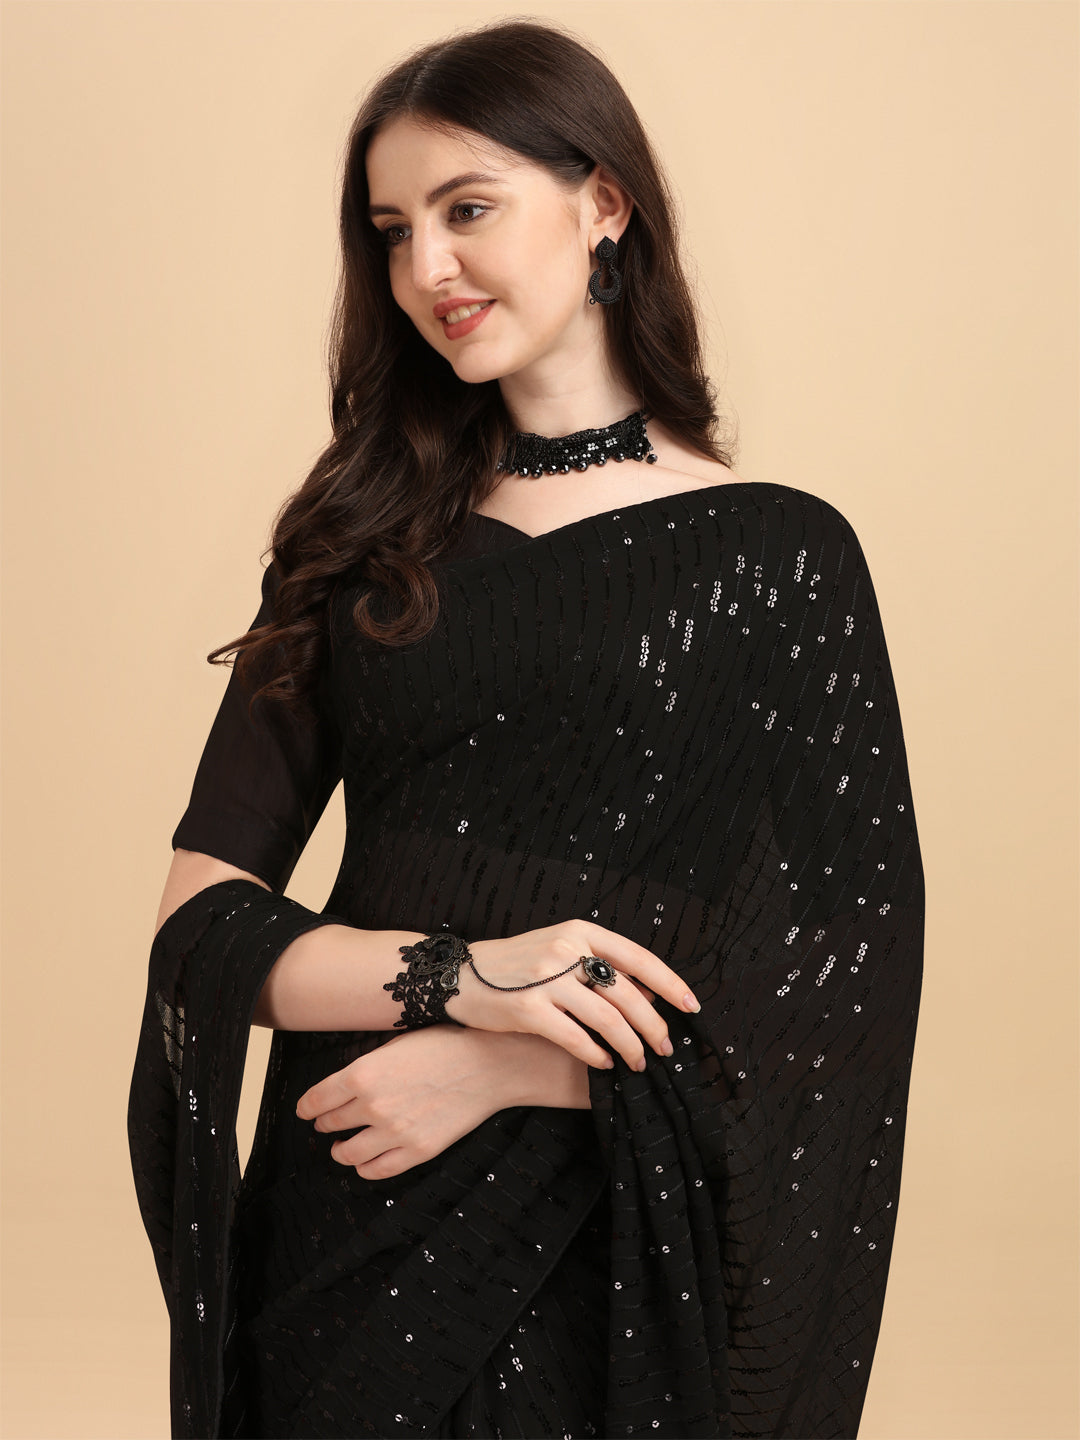 Fashionable Black Color Sequence Work Saree